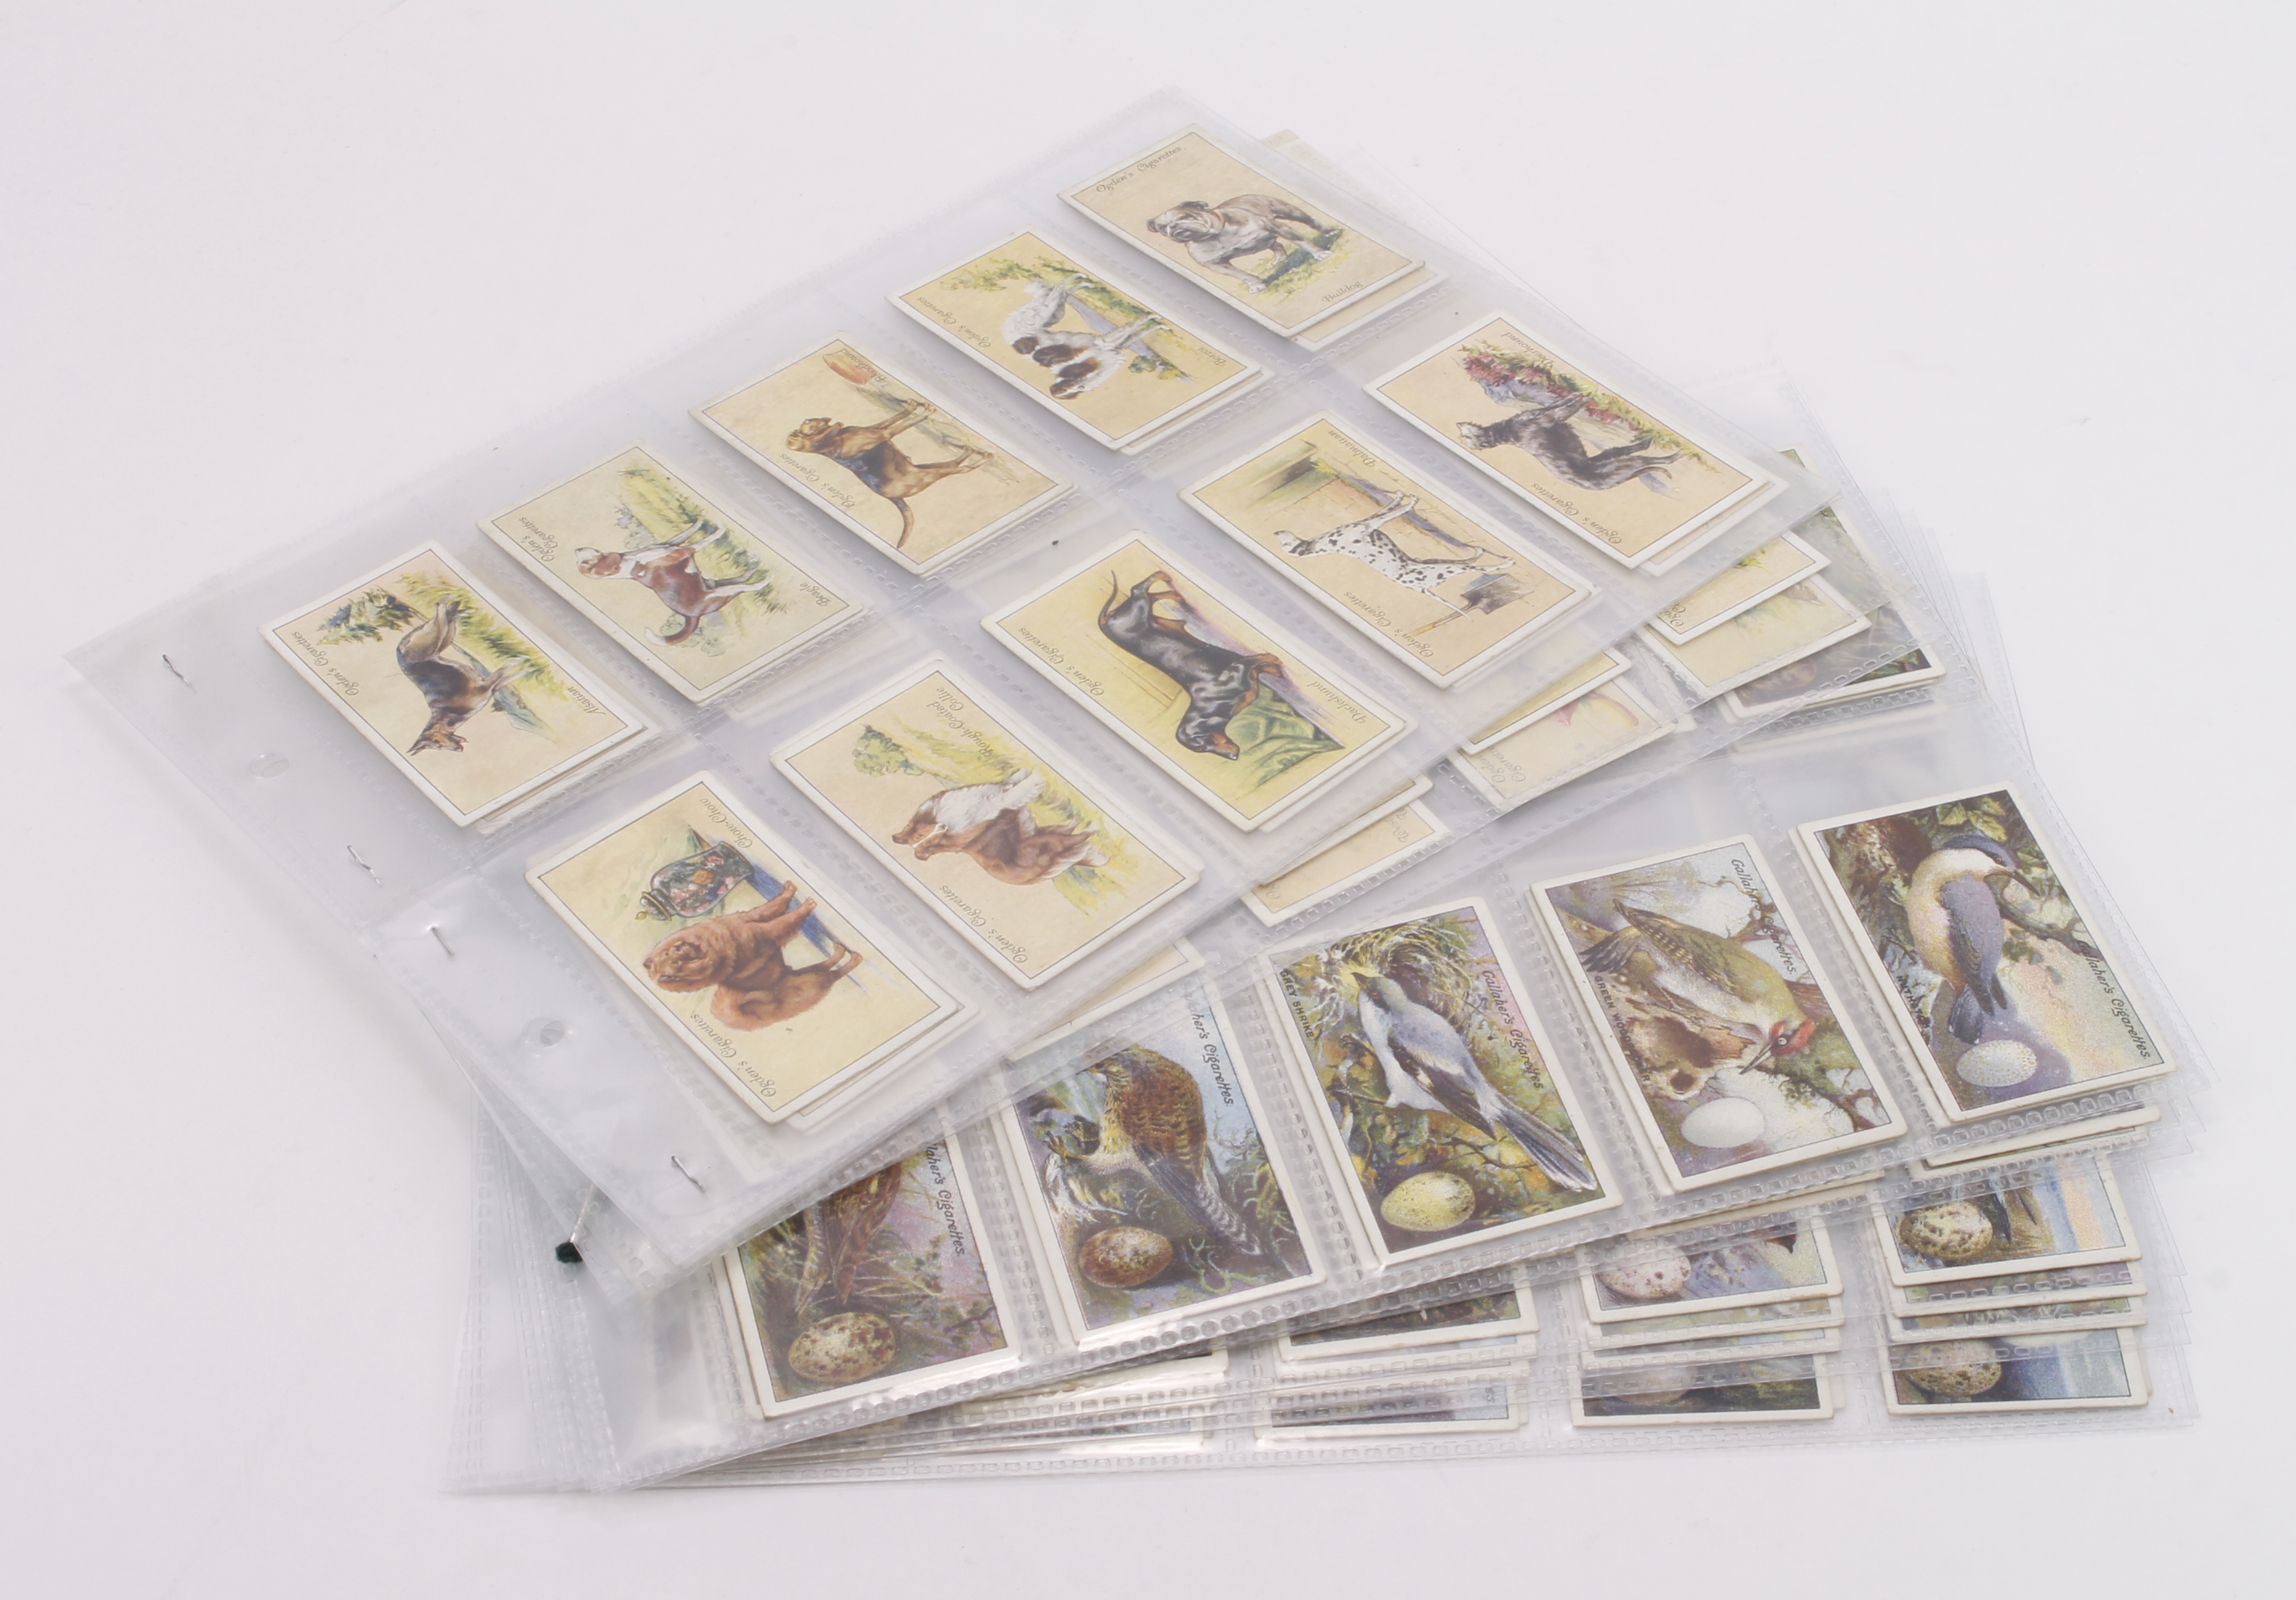 Complete sets in pages, Gallaher - Birds, Nests & Eggs G - VG, and Ogden - Dogs, G, cat value £305